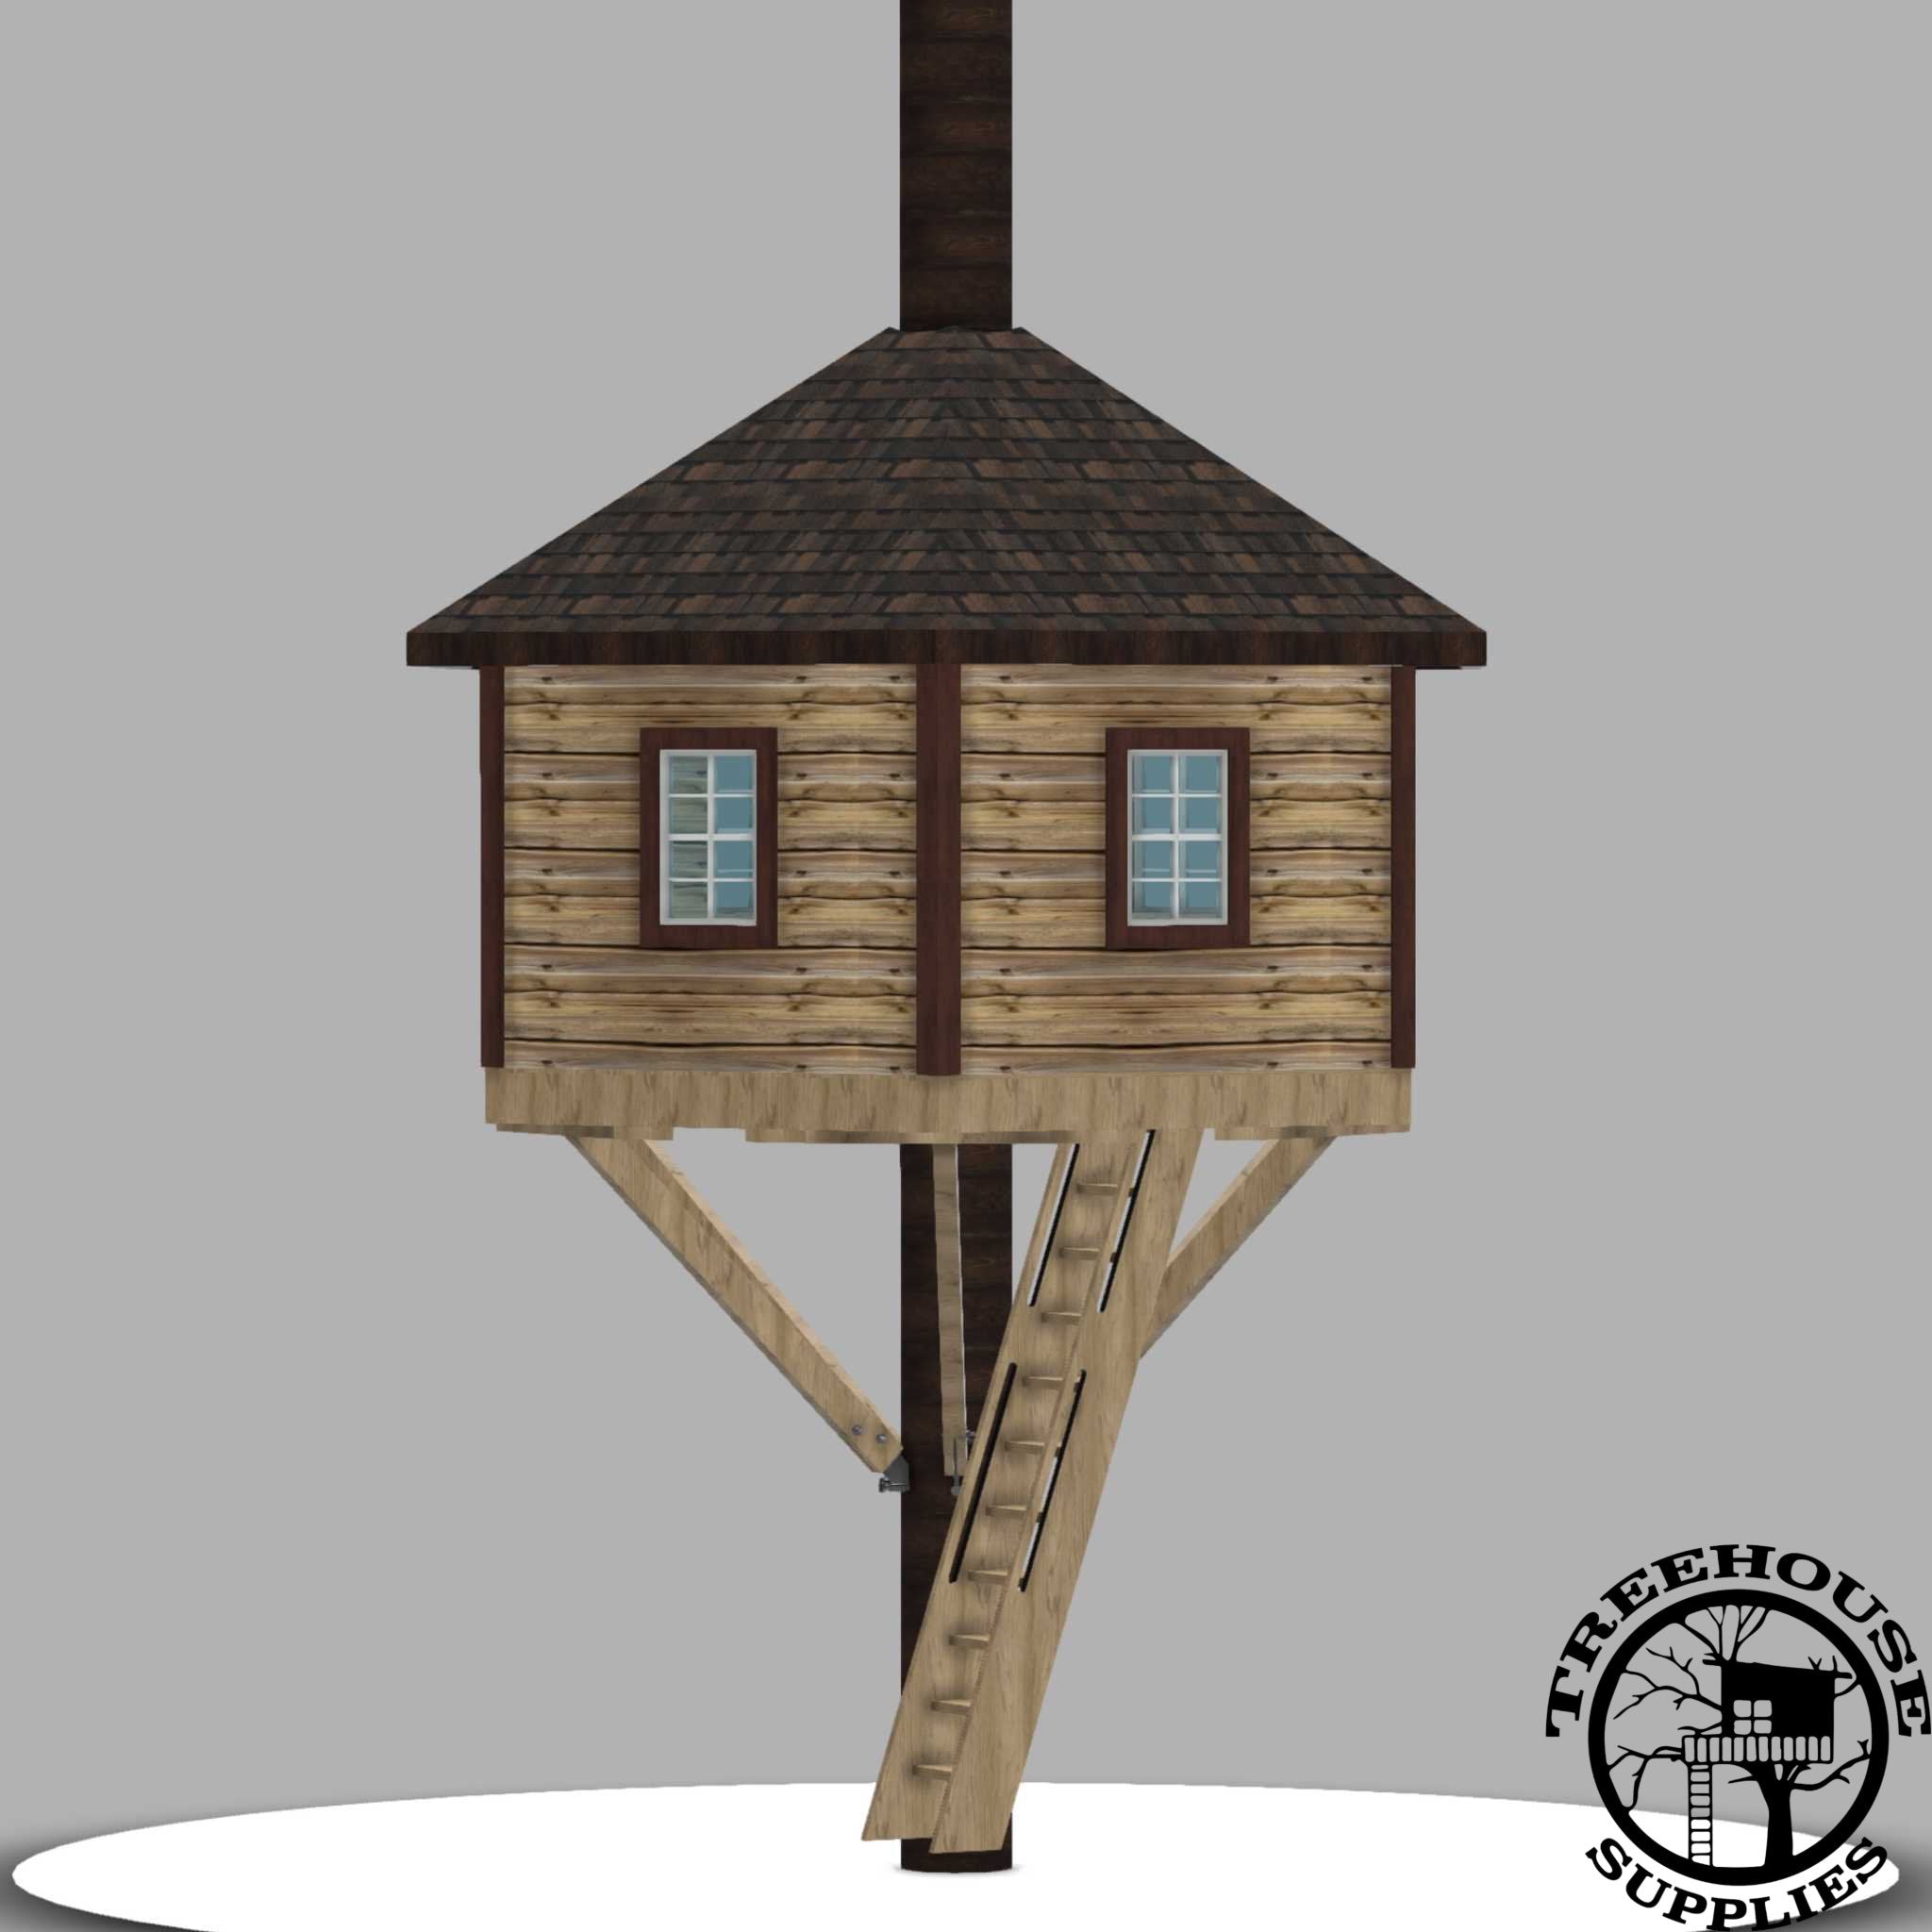 8' DIAMETER HEXAGONAL TREEHOUSE PLAN - NOW INCLUDES STEP-BY-STEP 3D MODELING!! - Treehouse Supplies